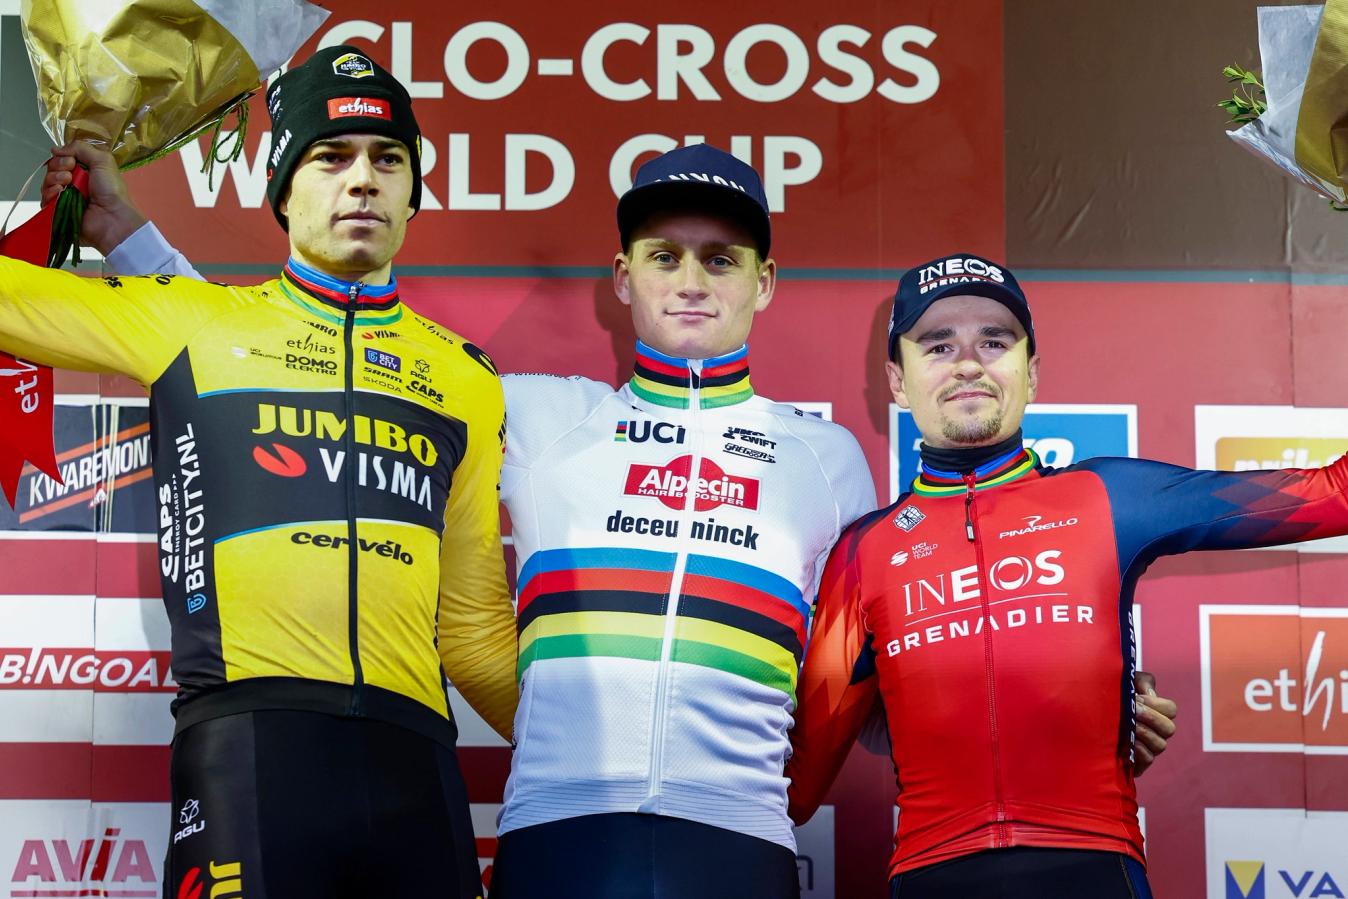 Van Aert, Van der Poel and Pidcock all finished on the podium in Gavere